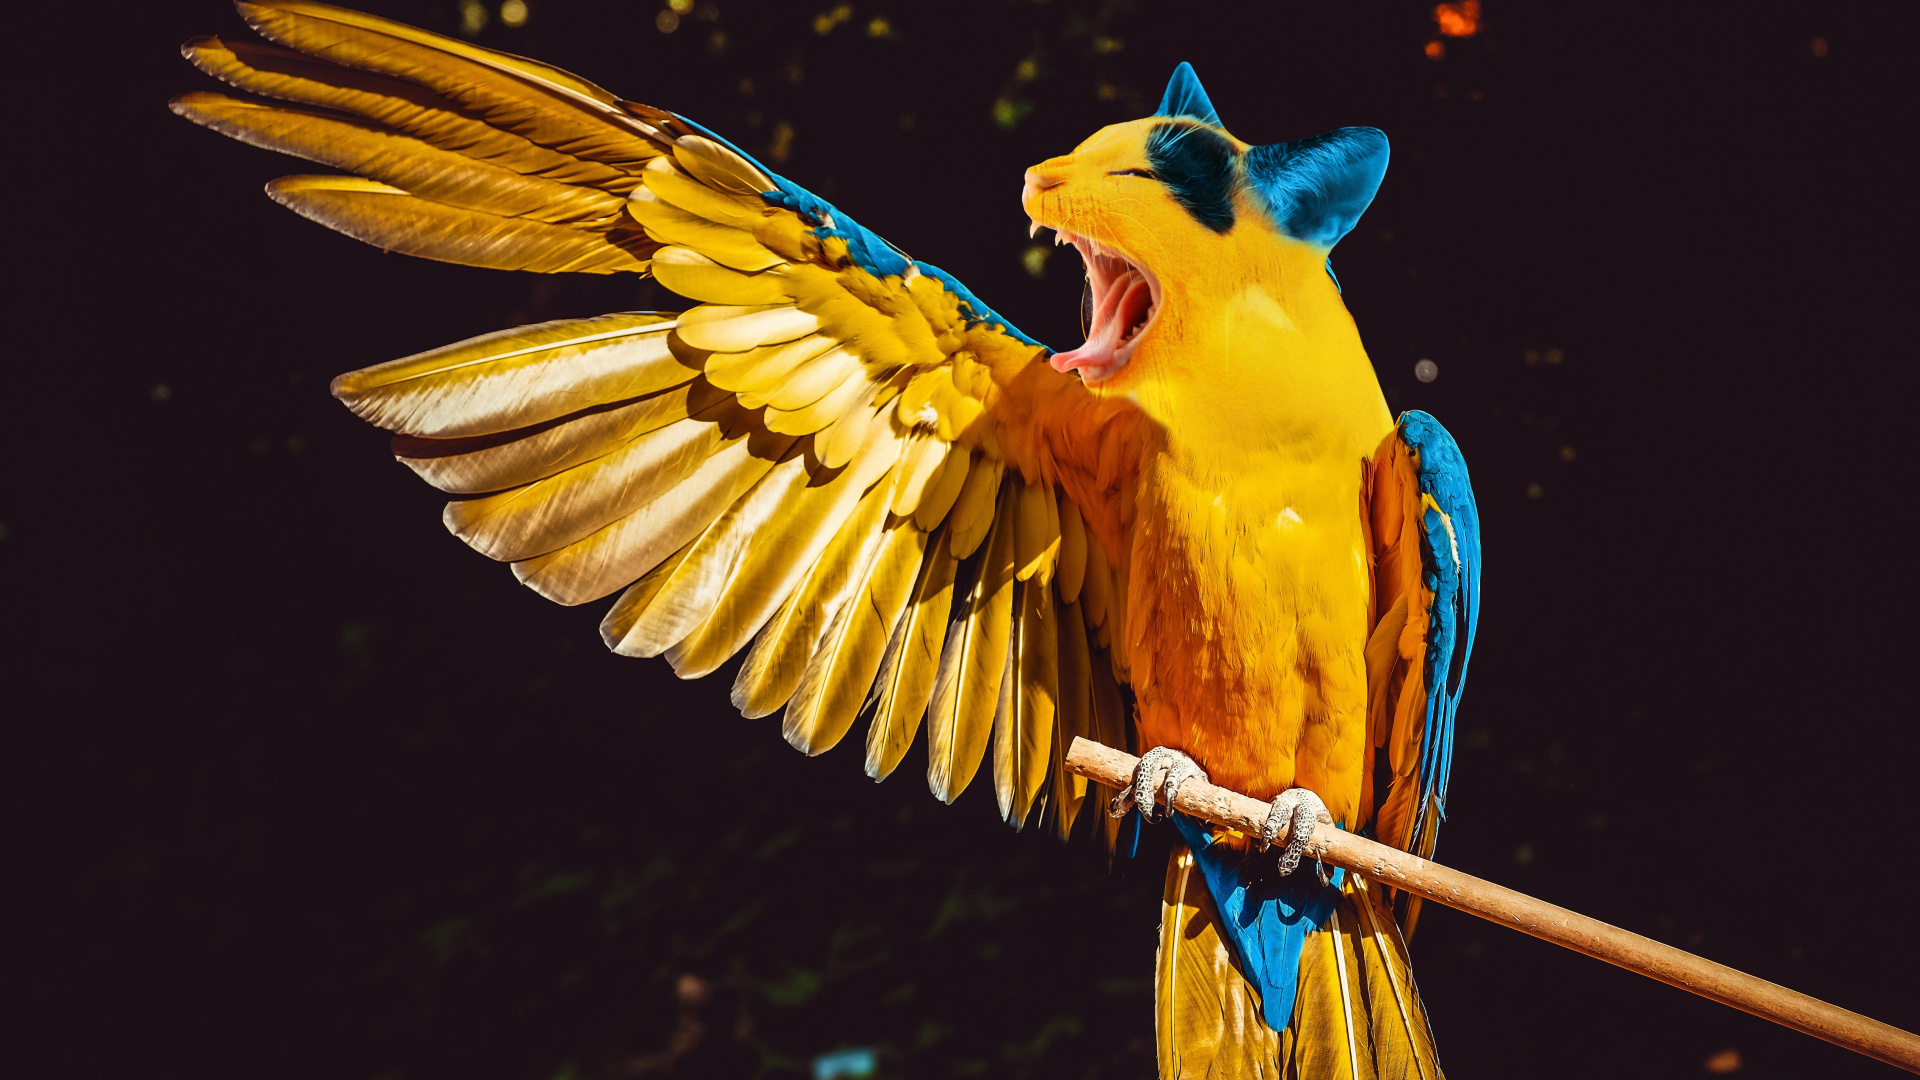 Yellow Blue and Orange Parrot. Wallpaper in 1920x1080 Resolution